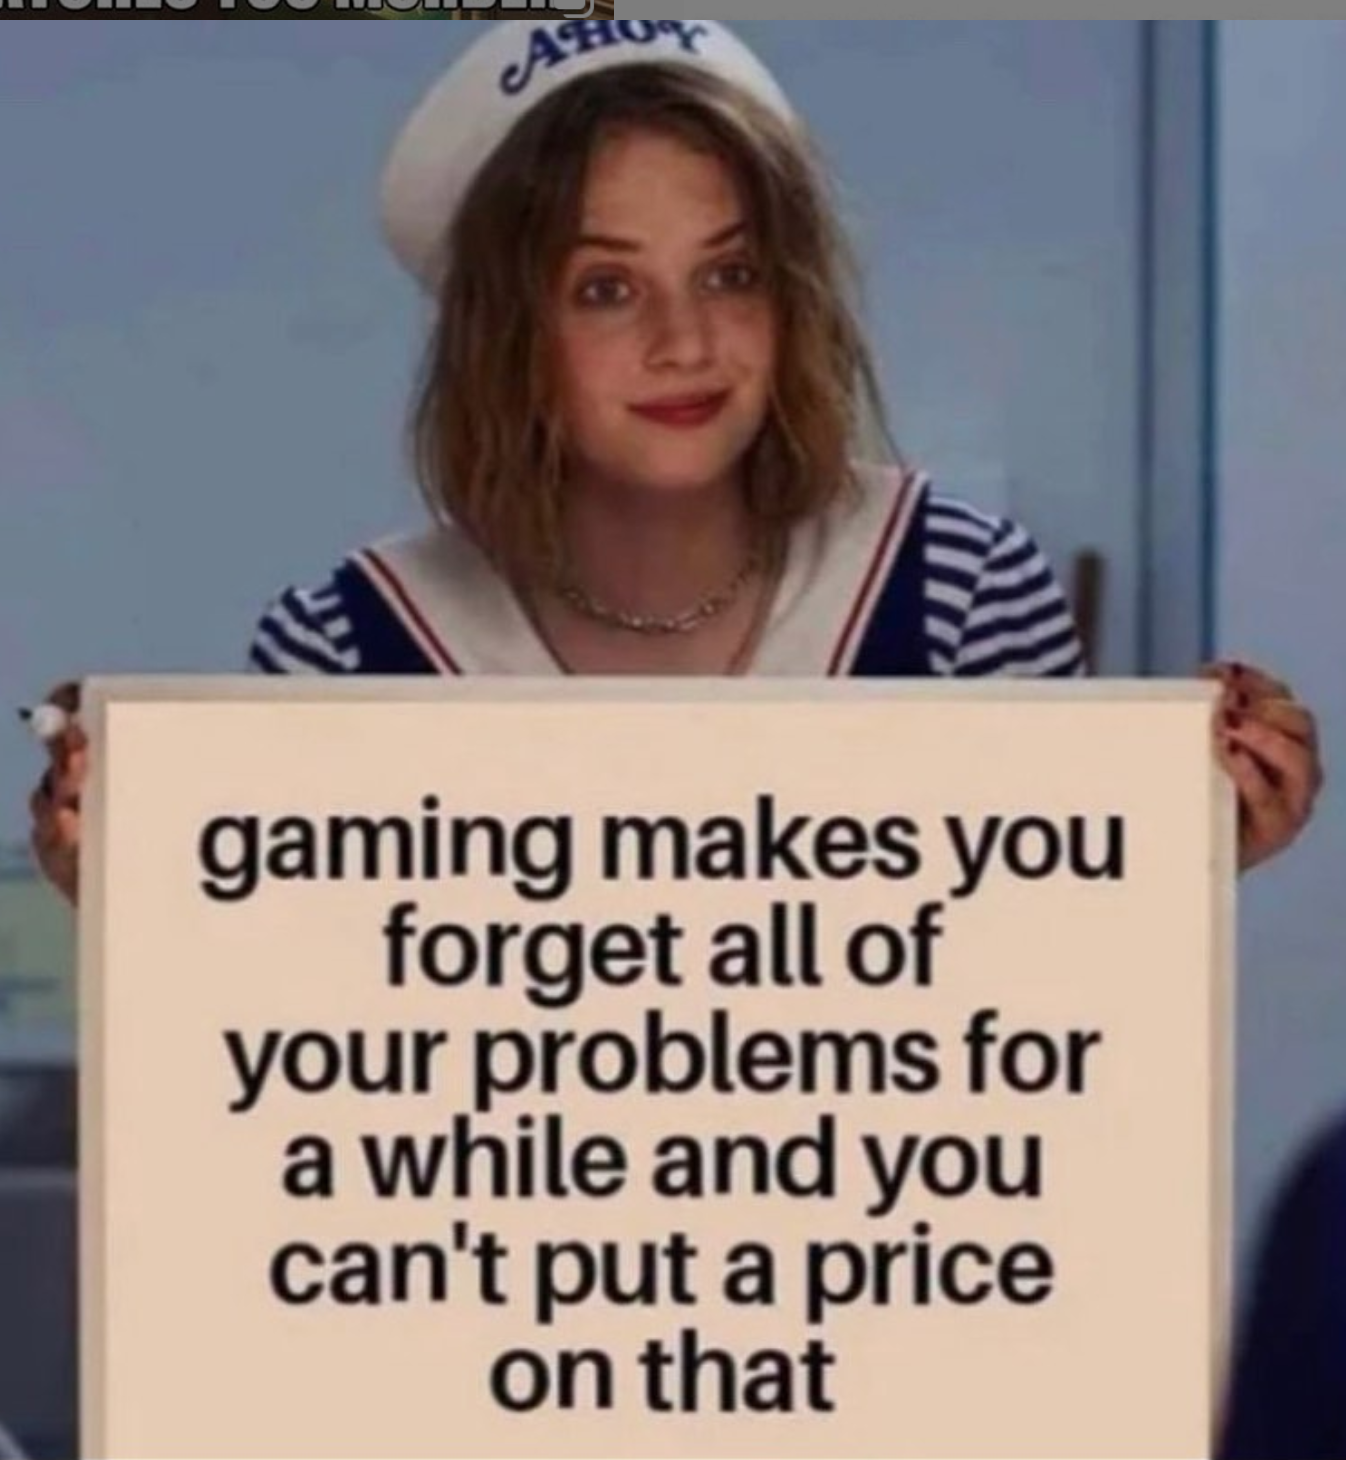 funny gaming memes - photo caption - Ahoy gaming makes you forget all of your problems for a while and you can't put a price on that